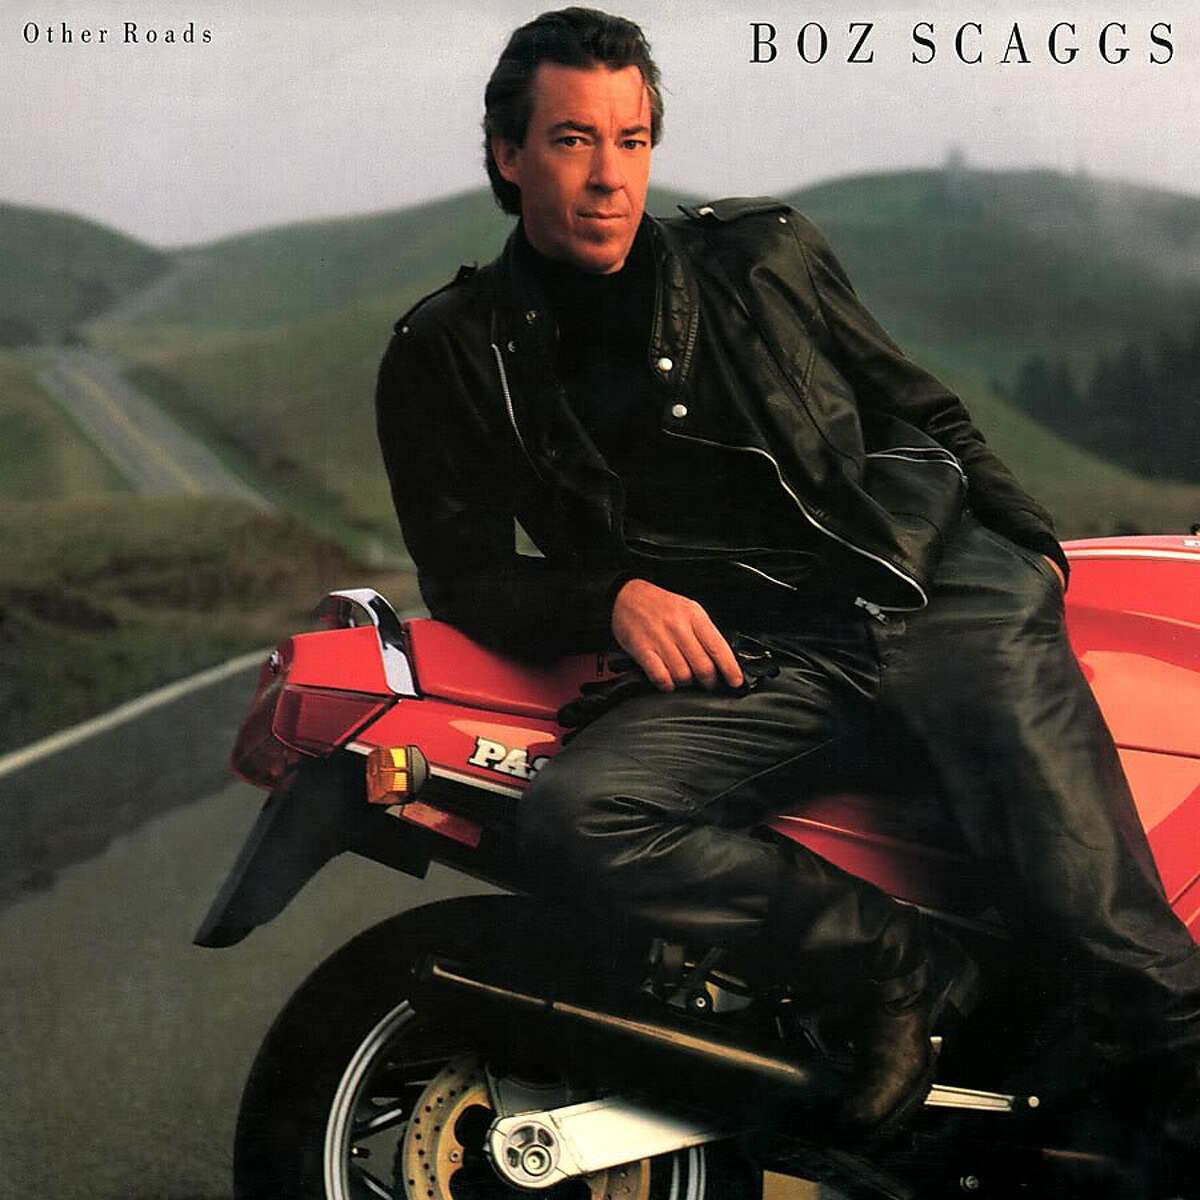 Boz Scaggs: "Other Roads"